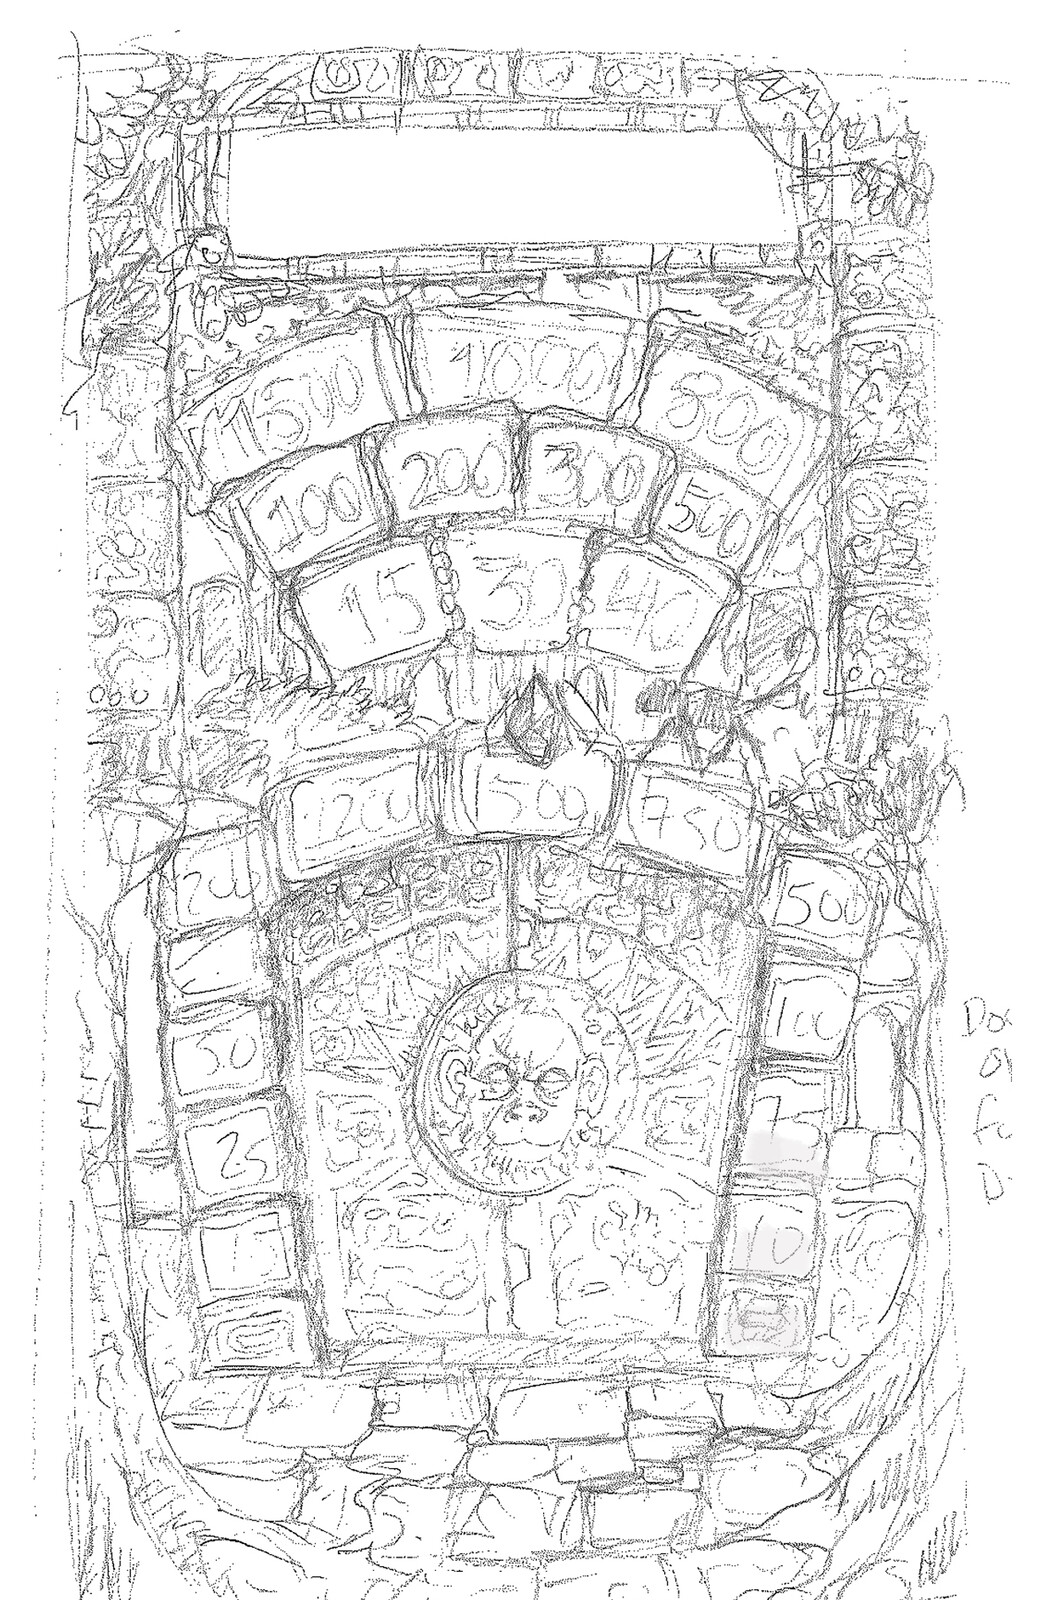 Initial sketch for the game screen.